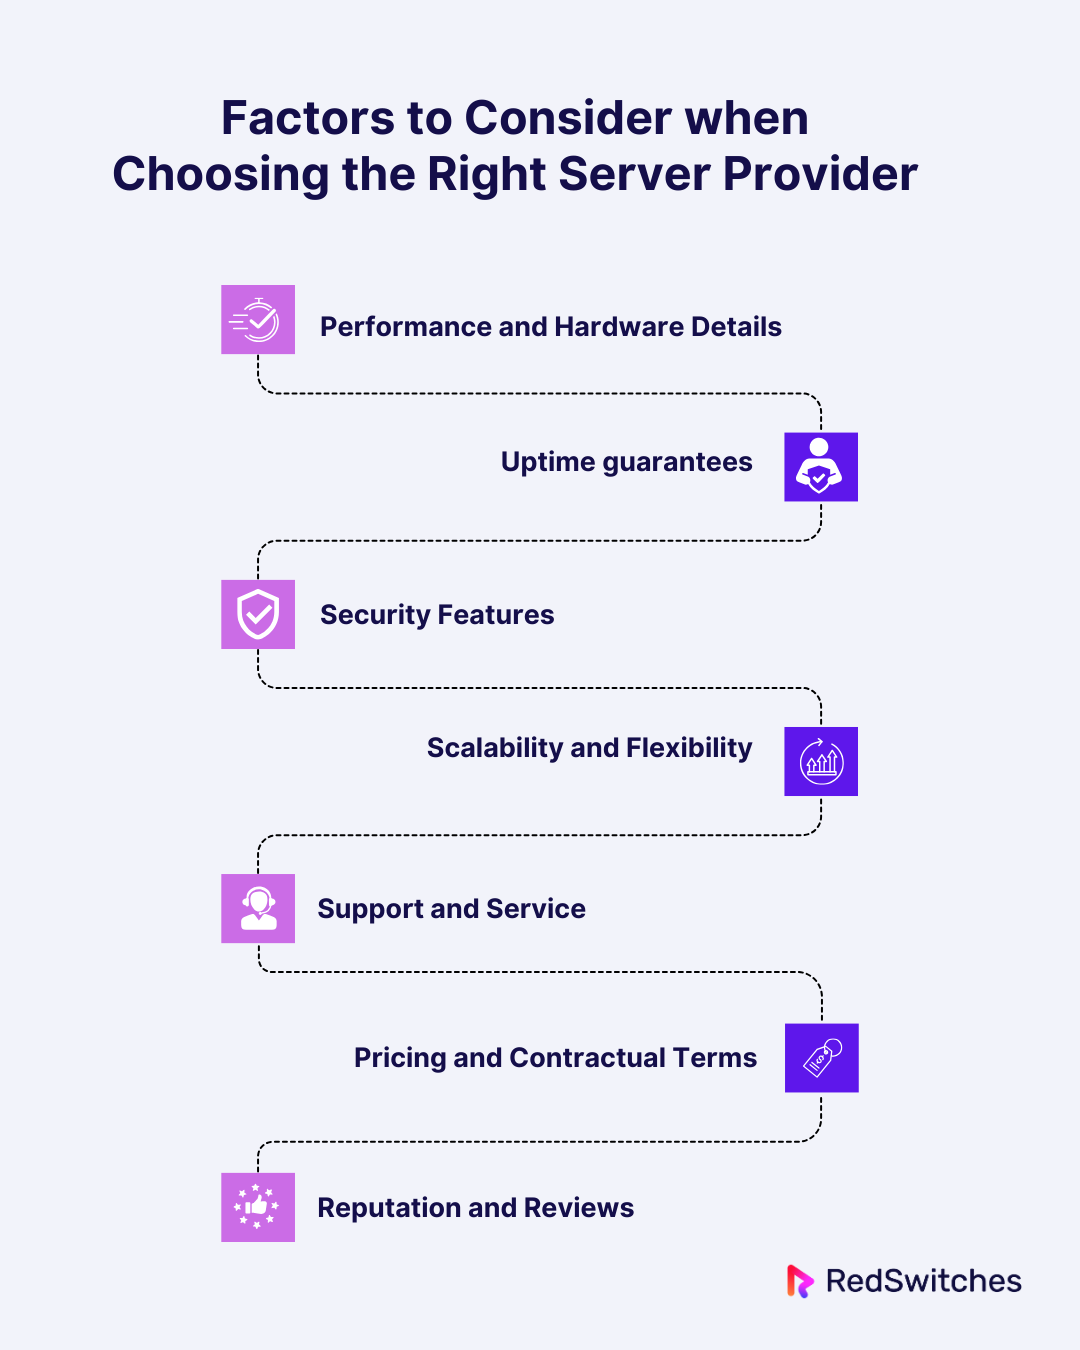 Factors to Consider when Choosing the Right Server Provider